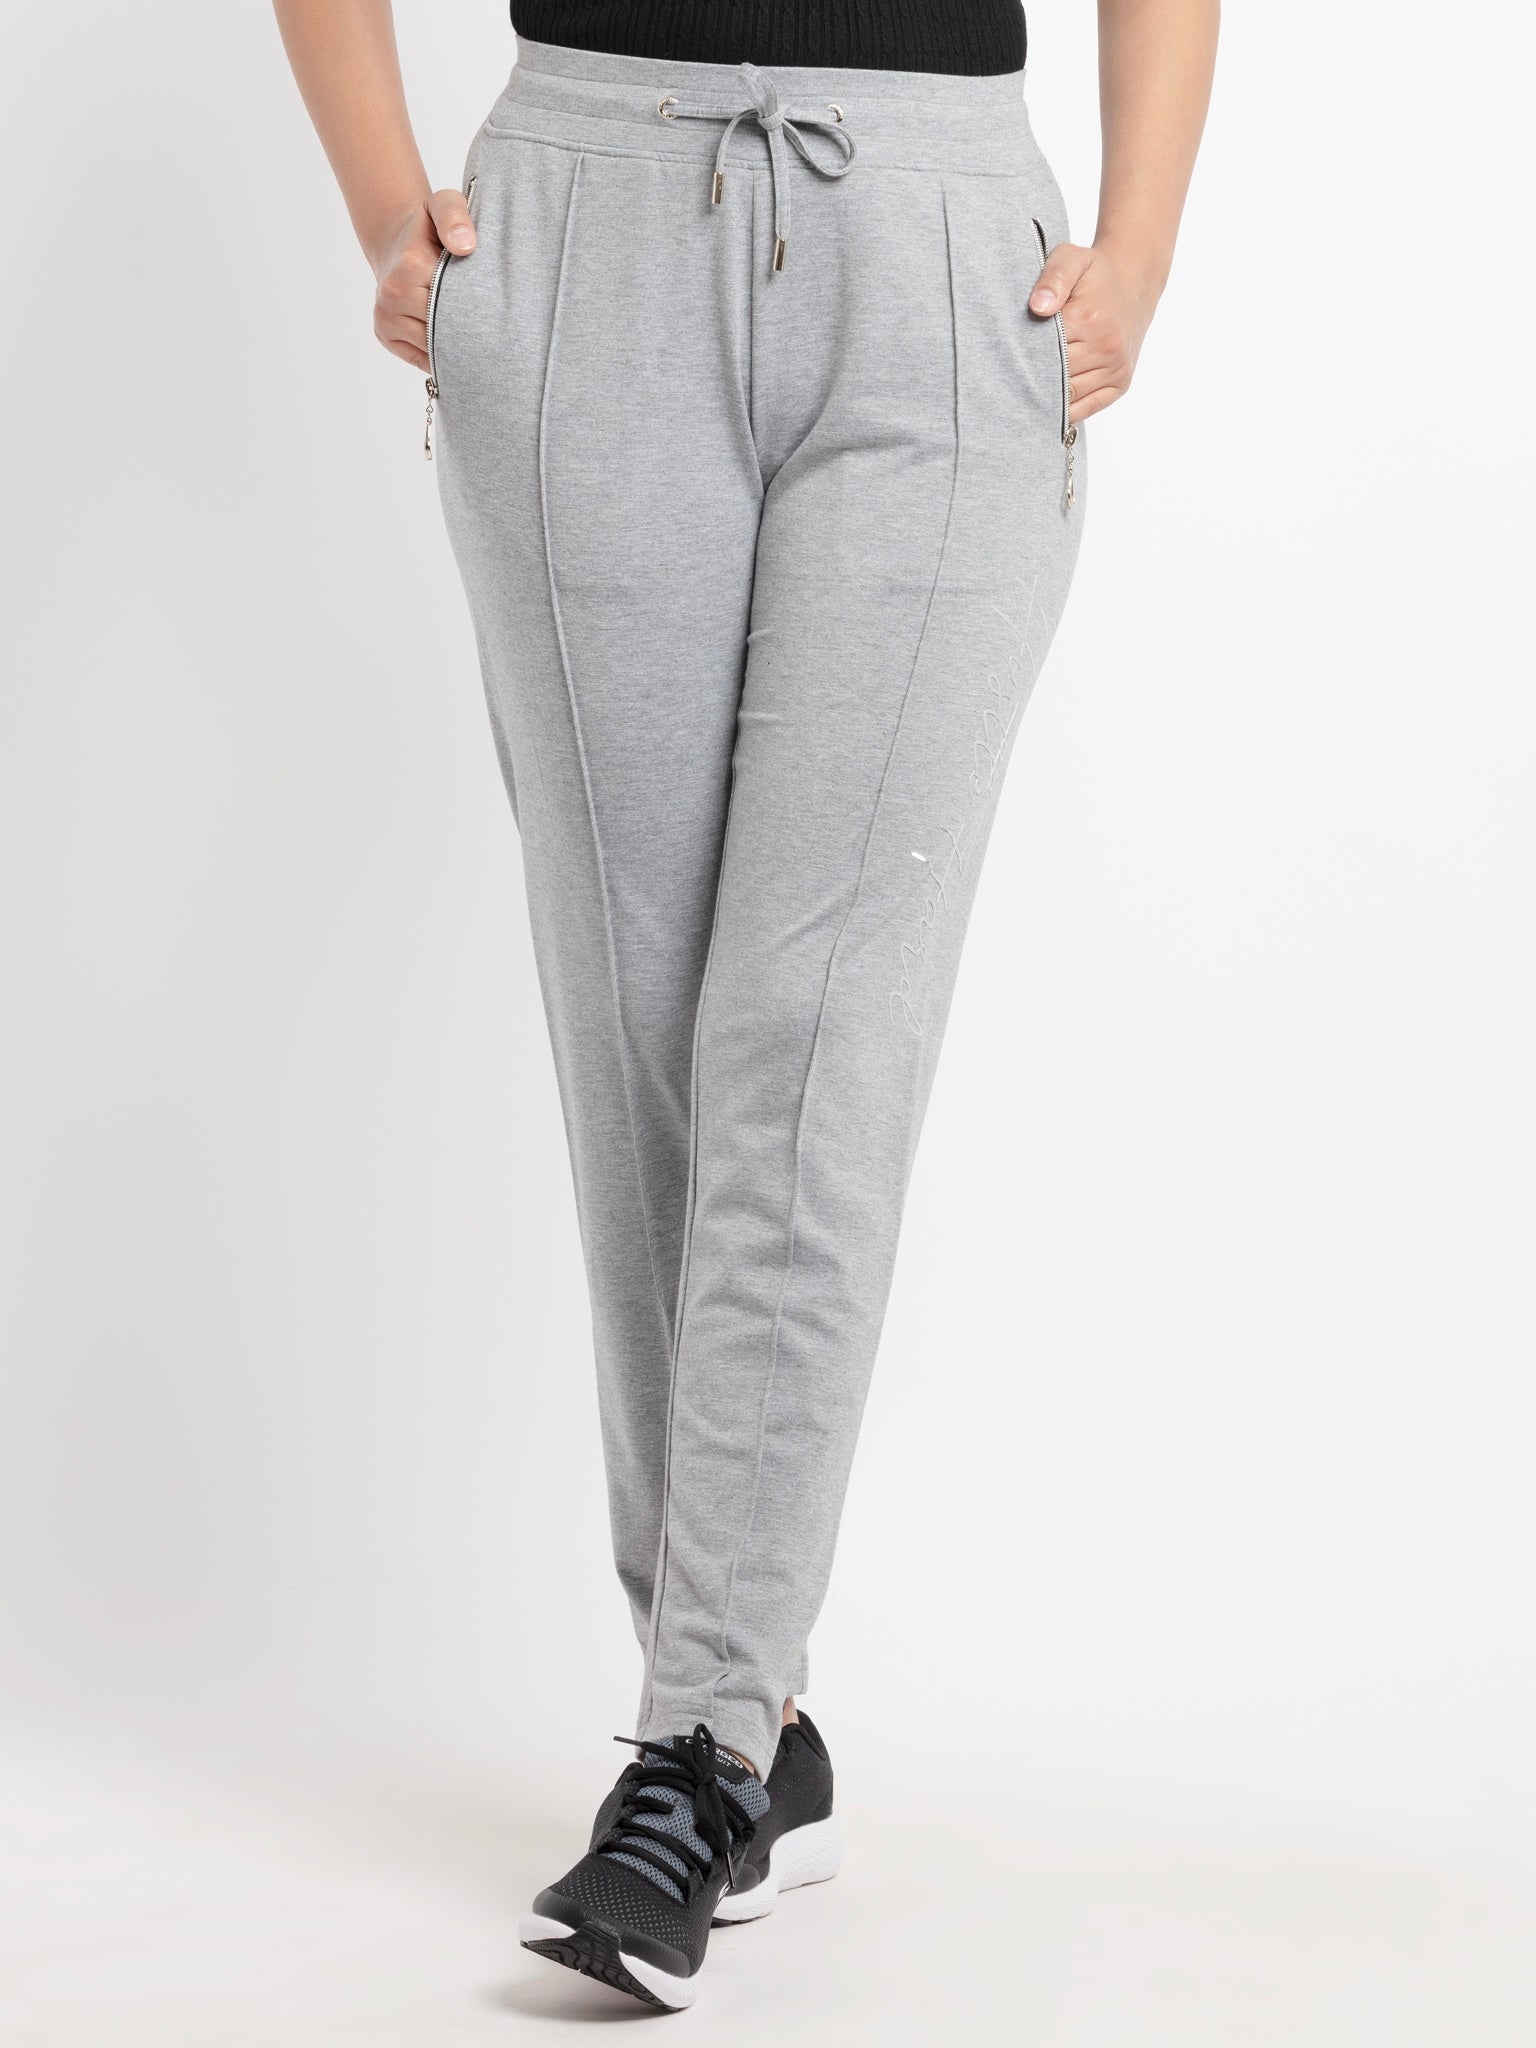 Women'ss Ankle length Printed Joggers